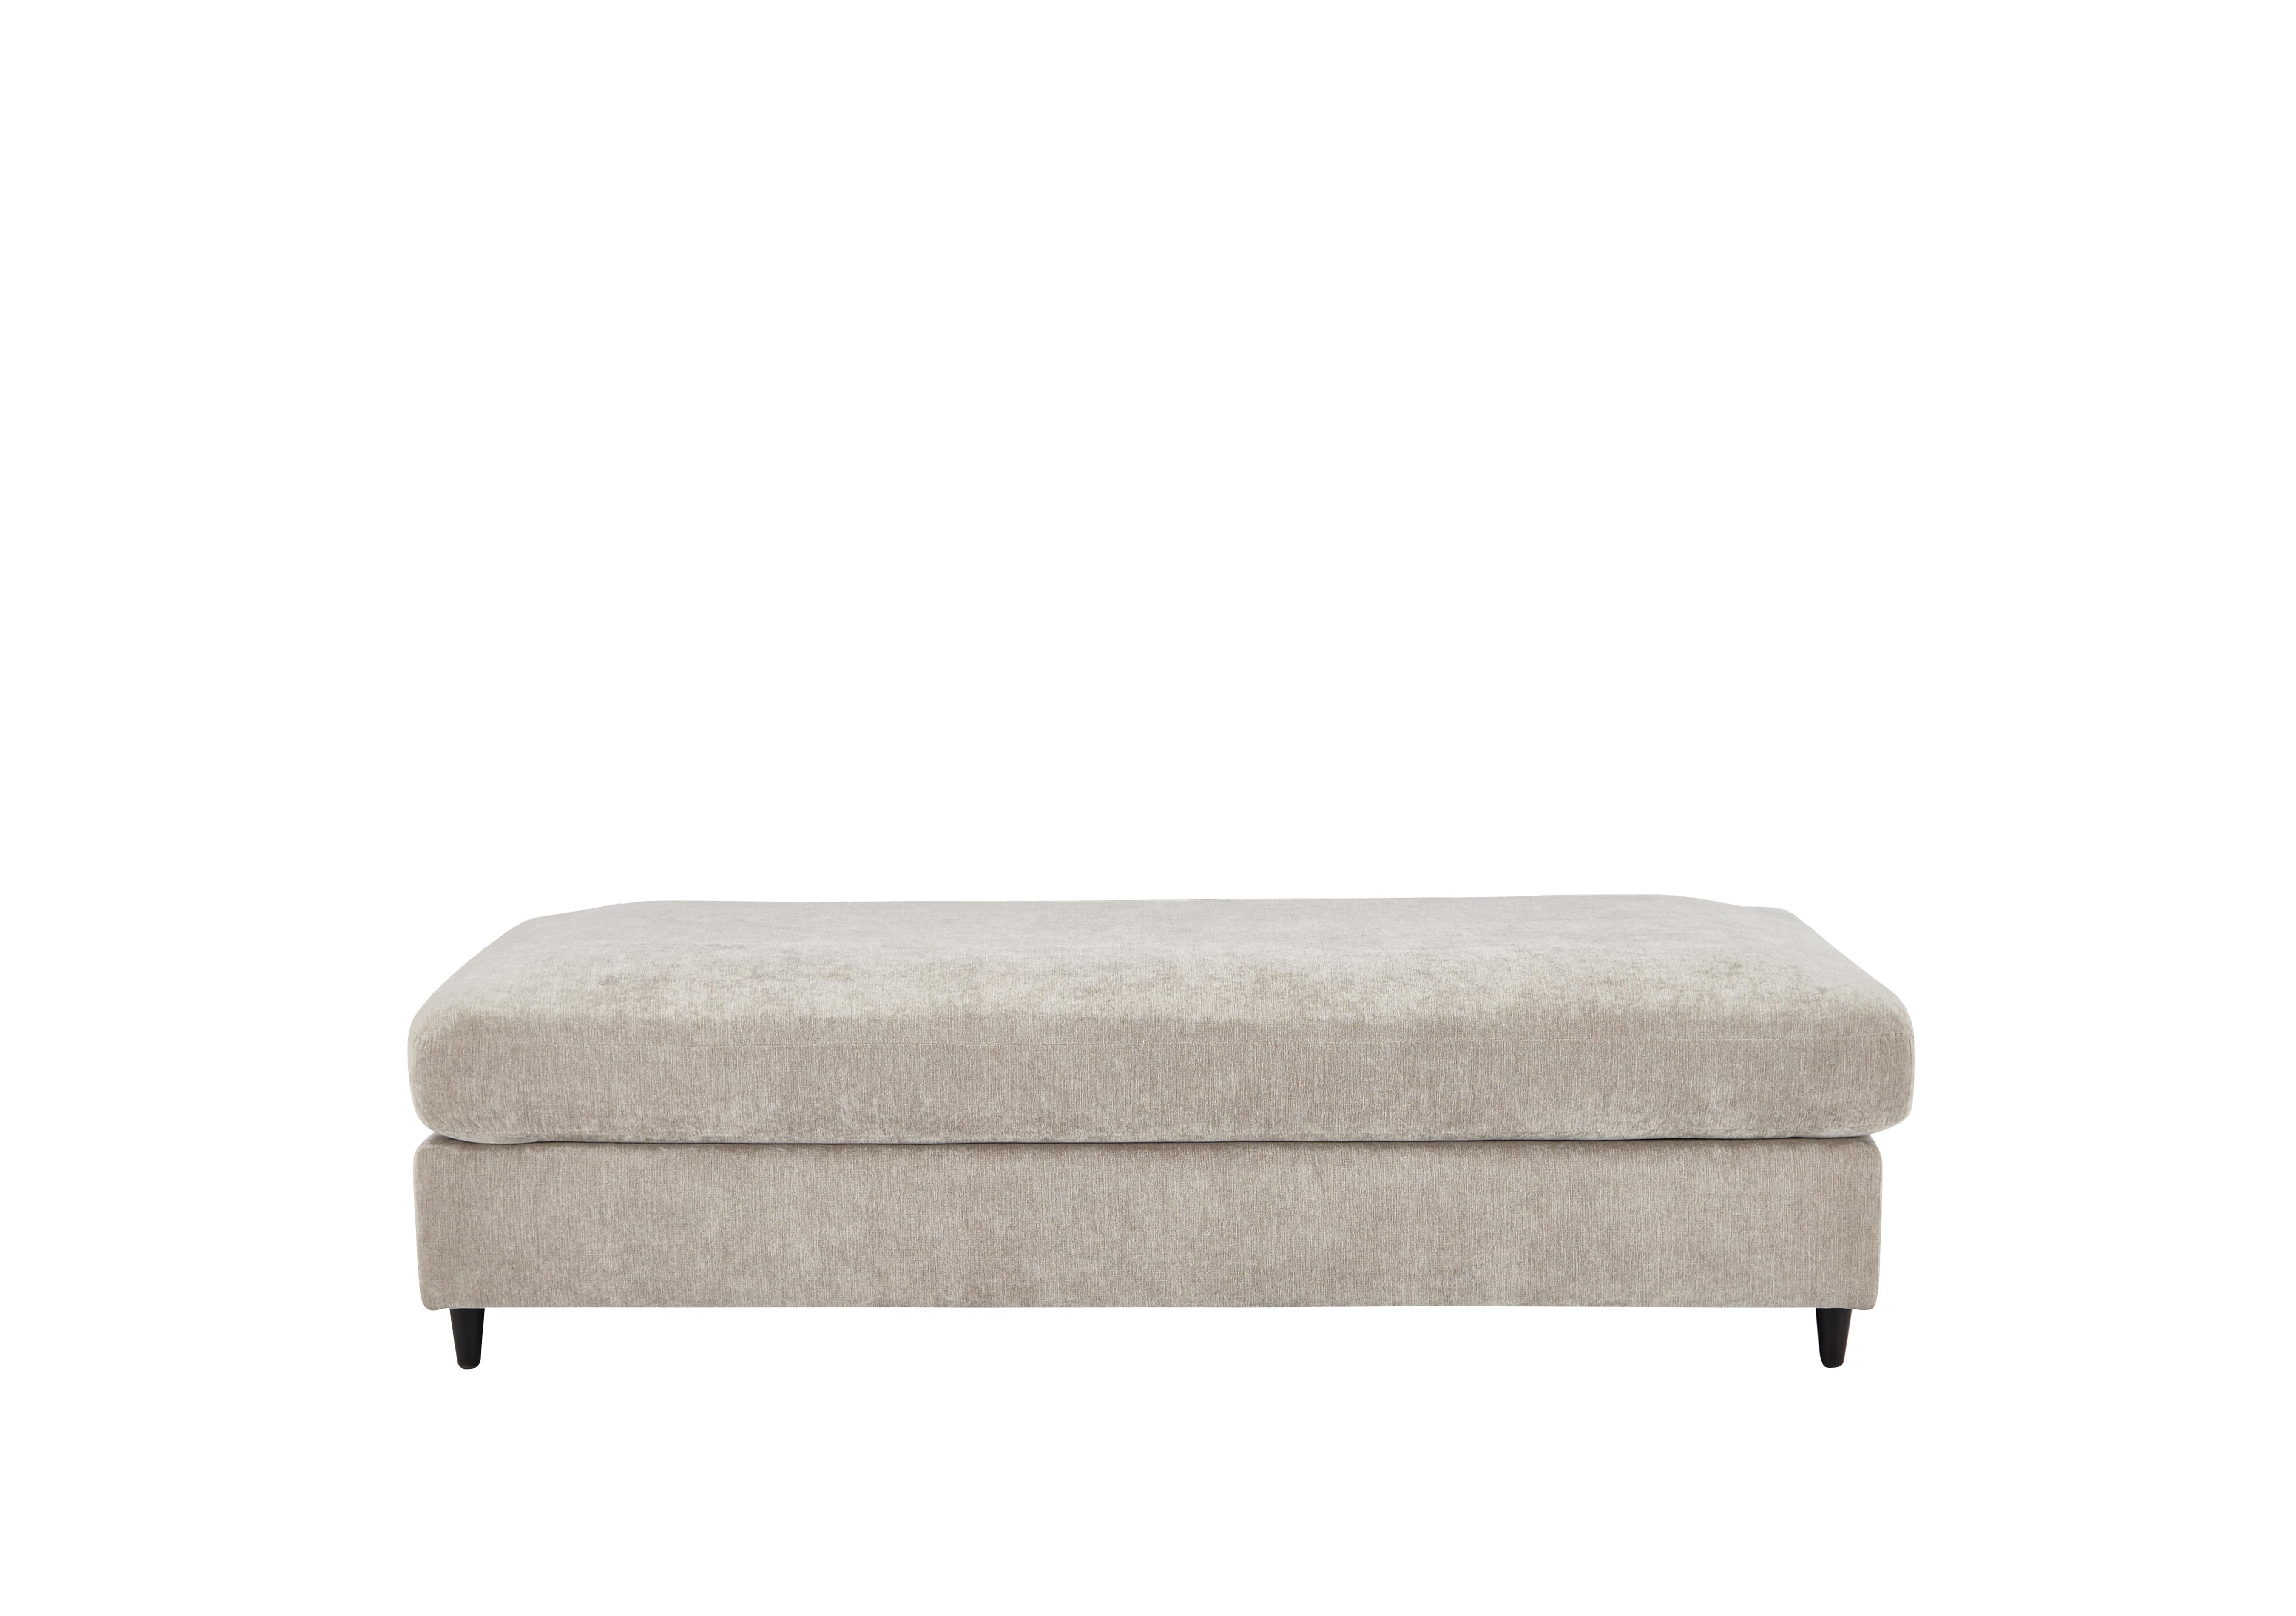 Esprit Large Fabric Stool Bed in Silver Ebony Feet on Furniture Village